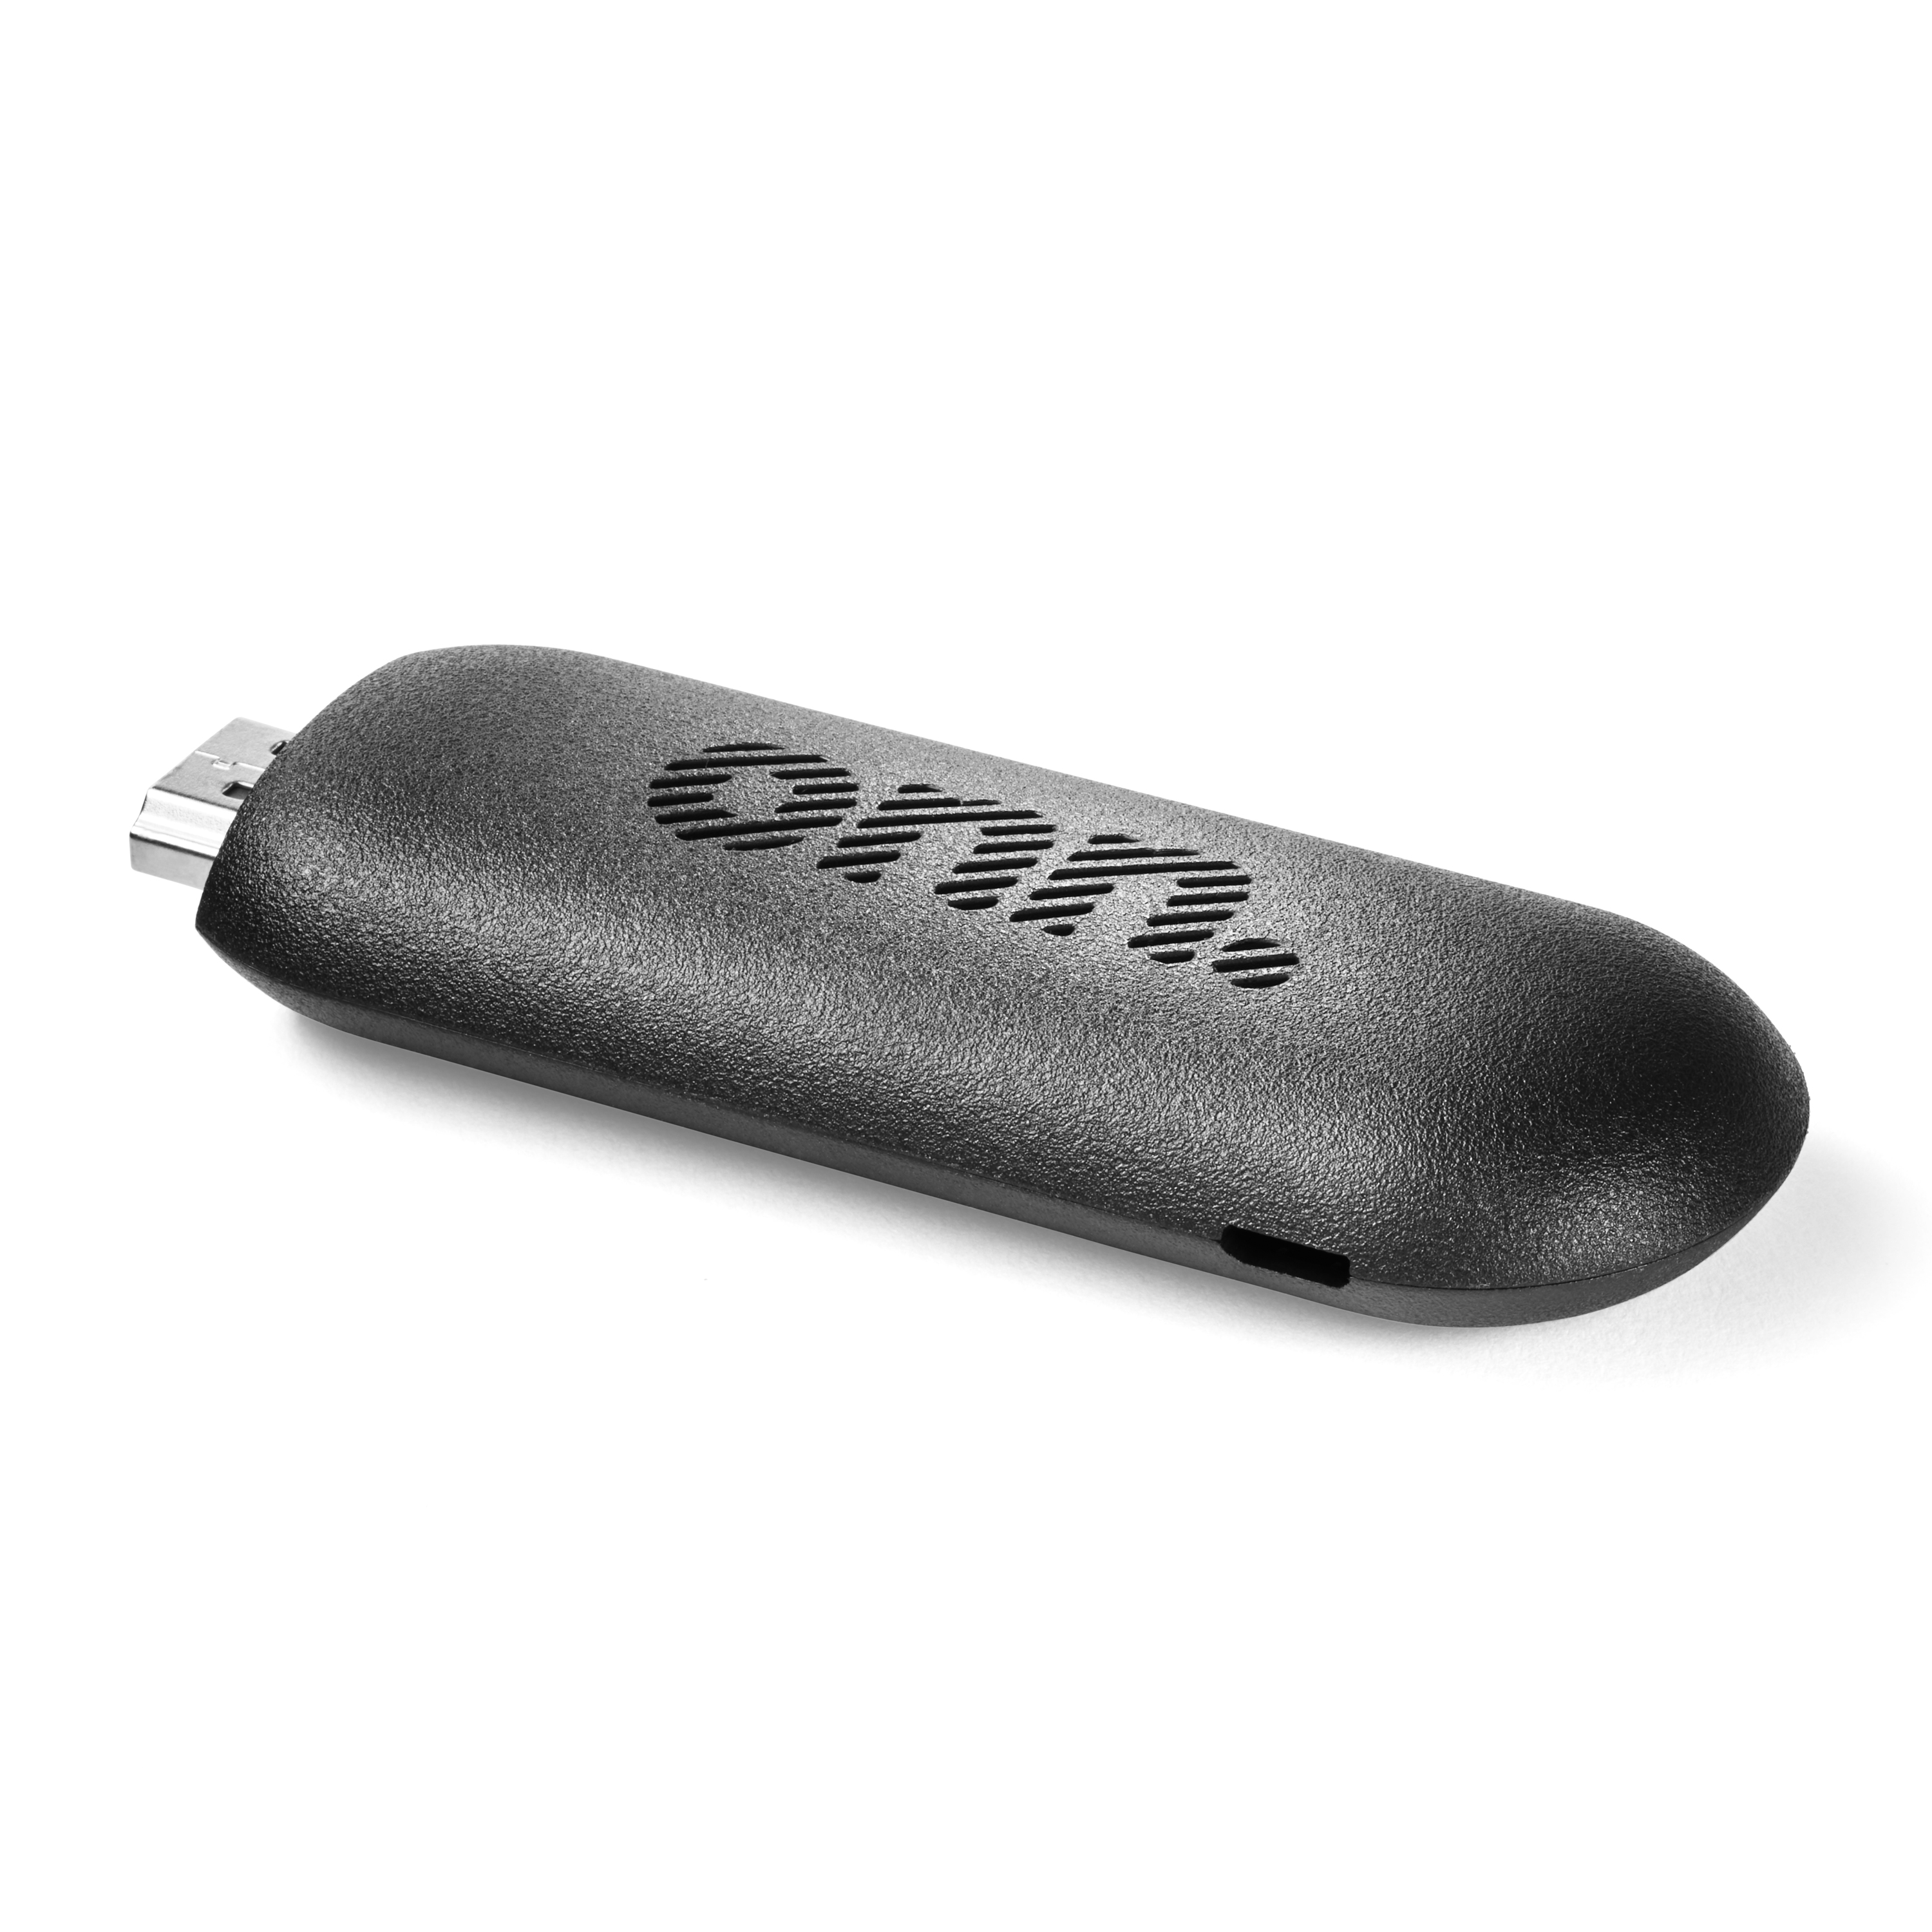 onn. Android TV 2K FHD Streaming Stick with Remote Control & Power Adapter - image 11 of 14